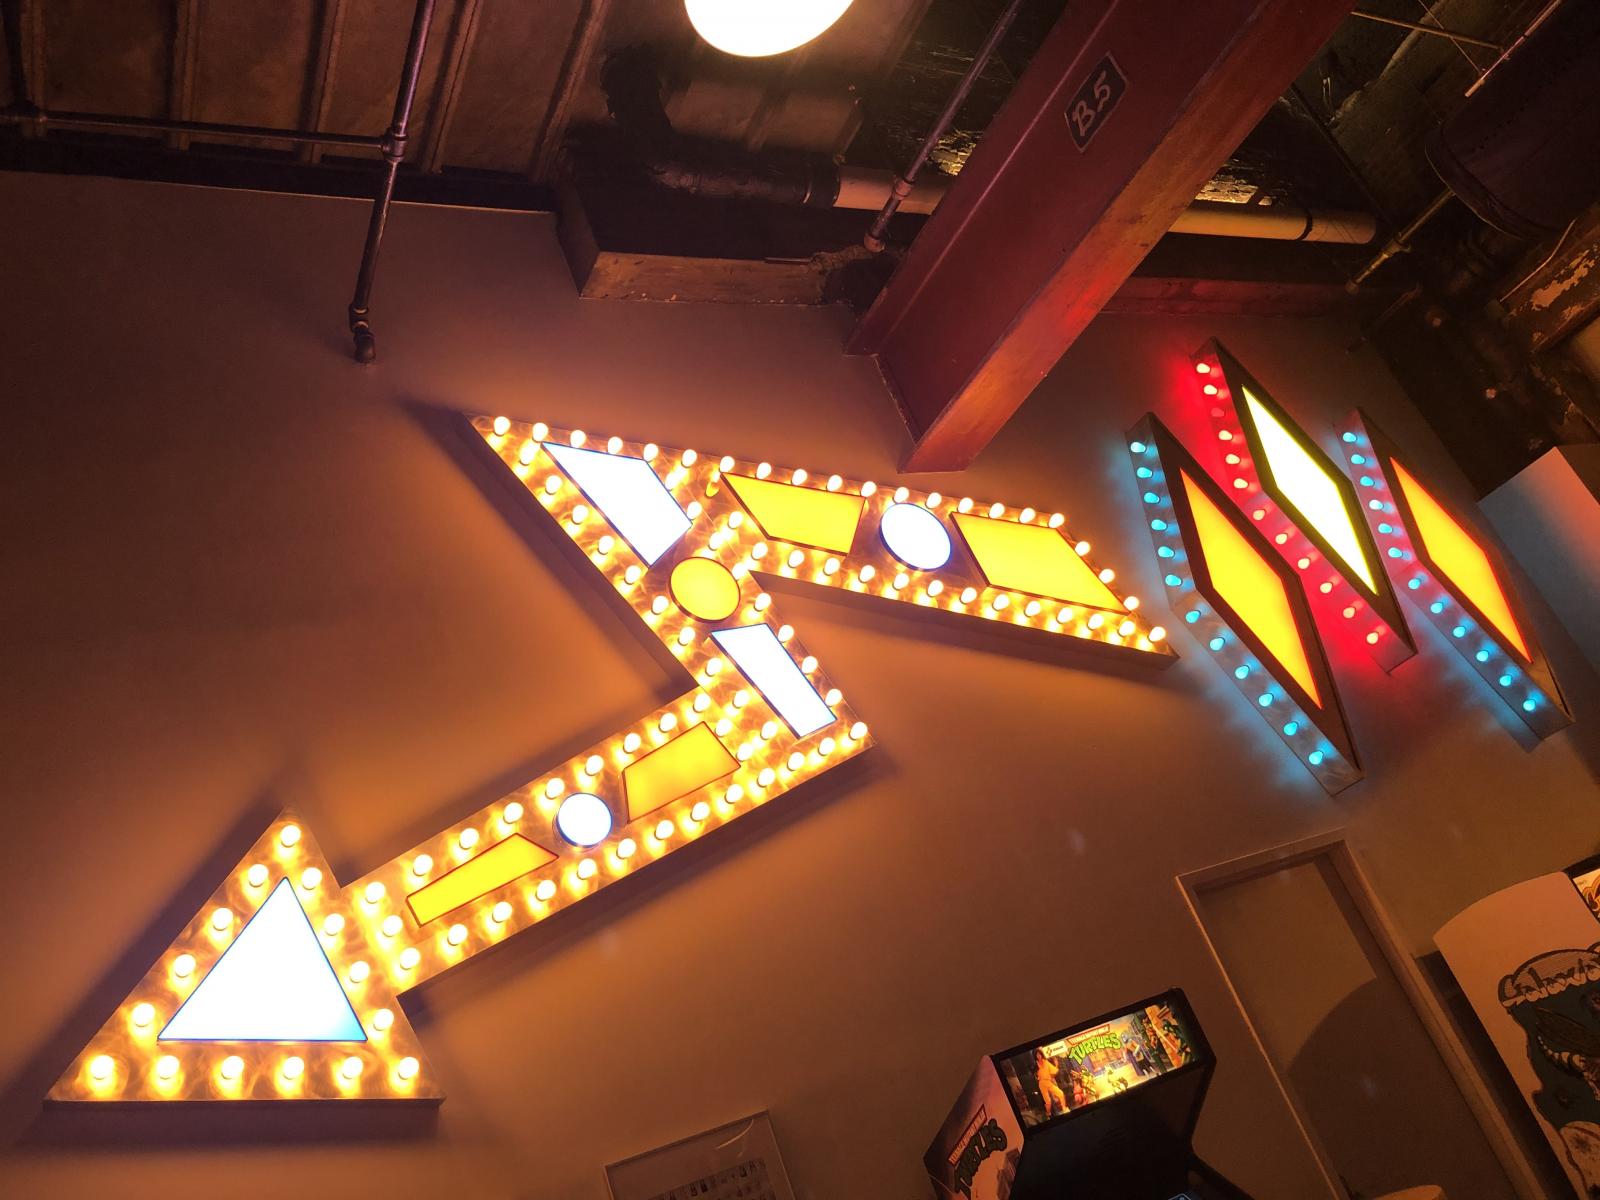  “The Big Arrow” is an installation created for the bar, arcade and music venue in Baltimore City, The North Avenue Market. It adds a retro feel to the vibrant atmosphere of this local establishment.